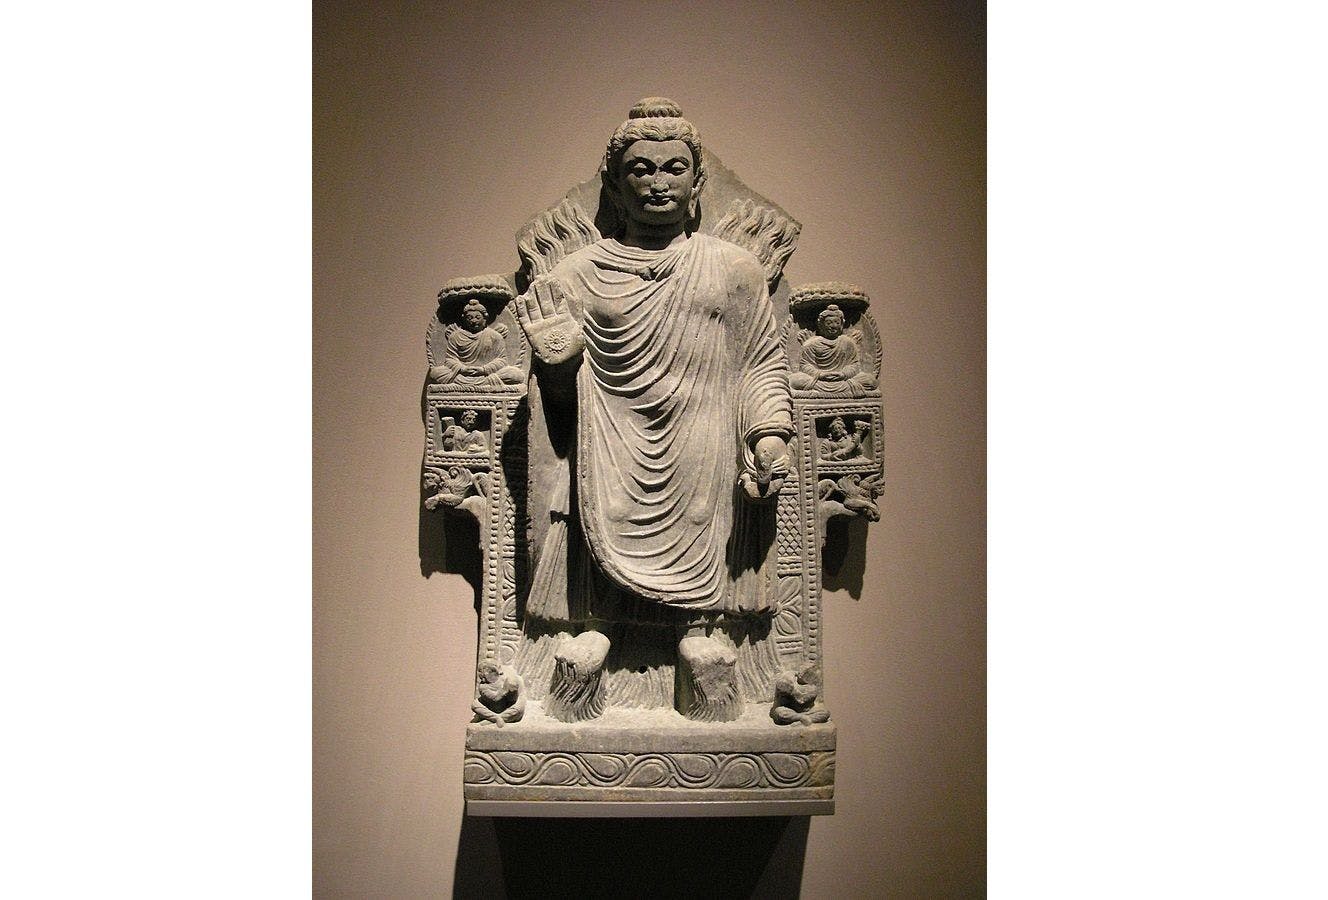 The Buddha shows miracles. Gandhara, 3rd century CE. Located in the Museum für Indische Kunst, Berlin-Dahlem